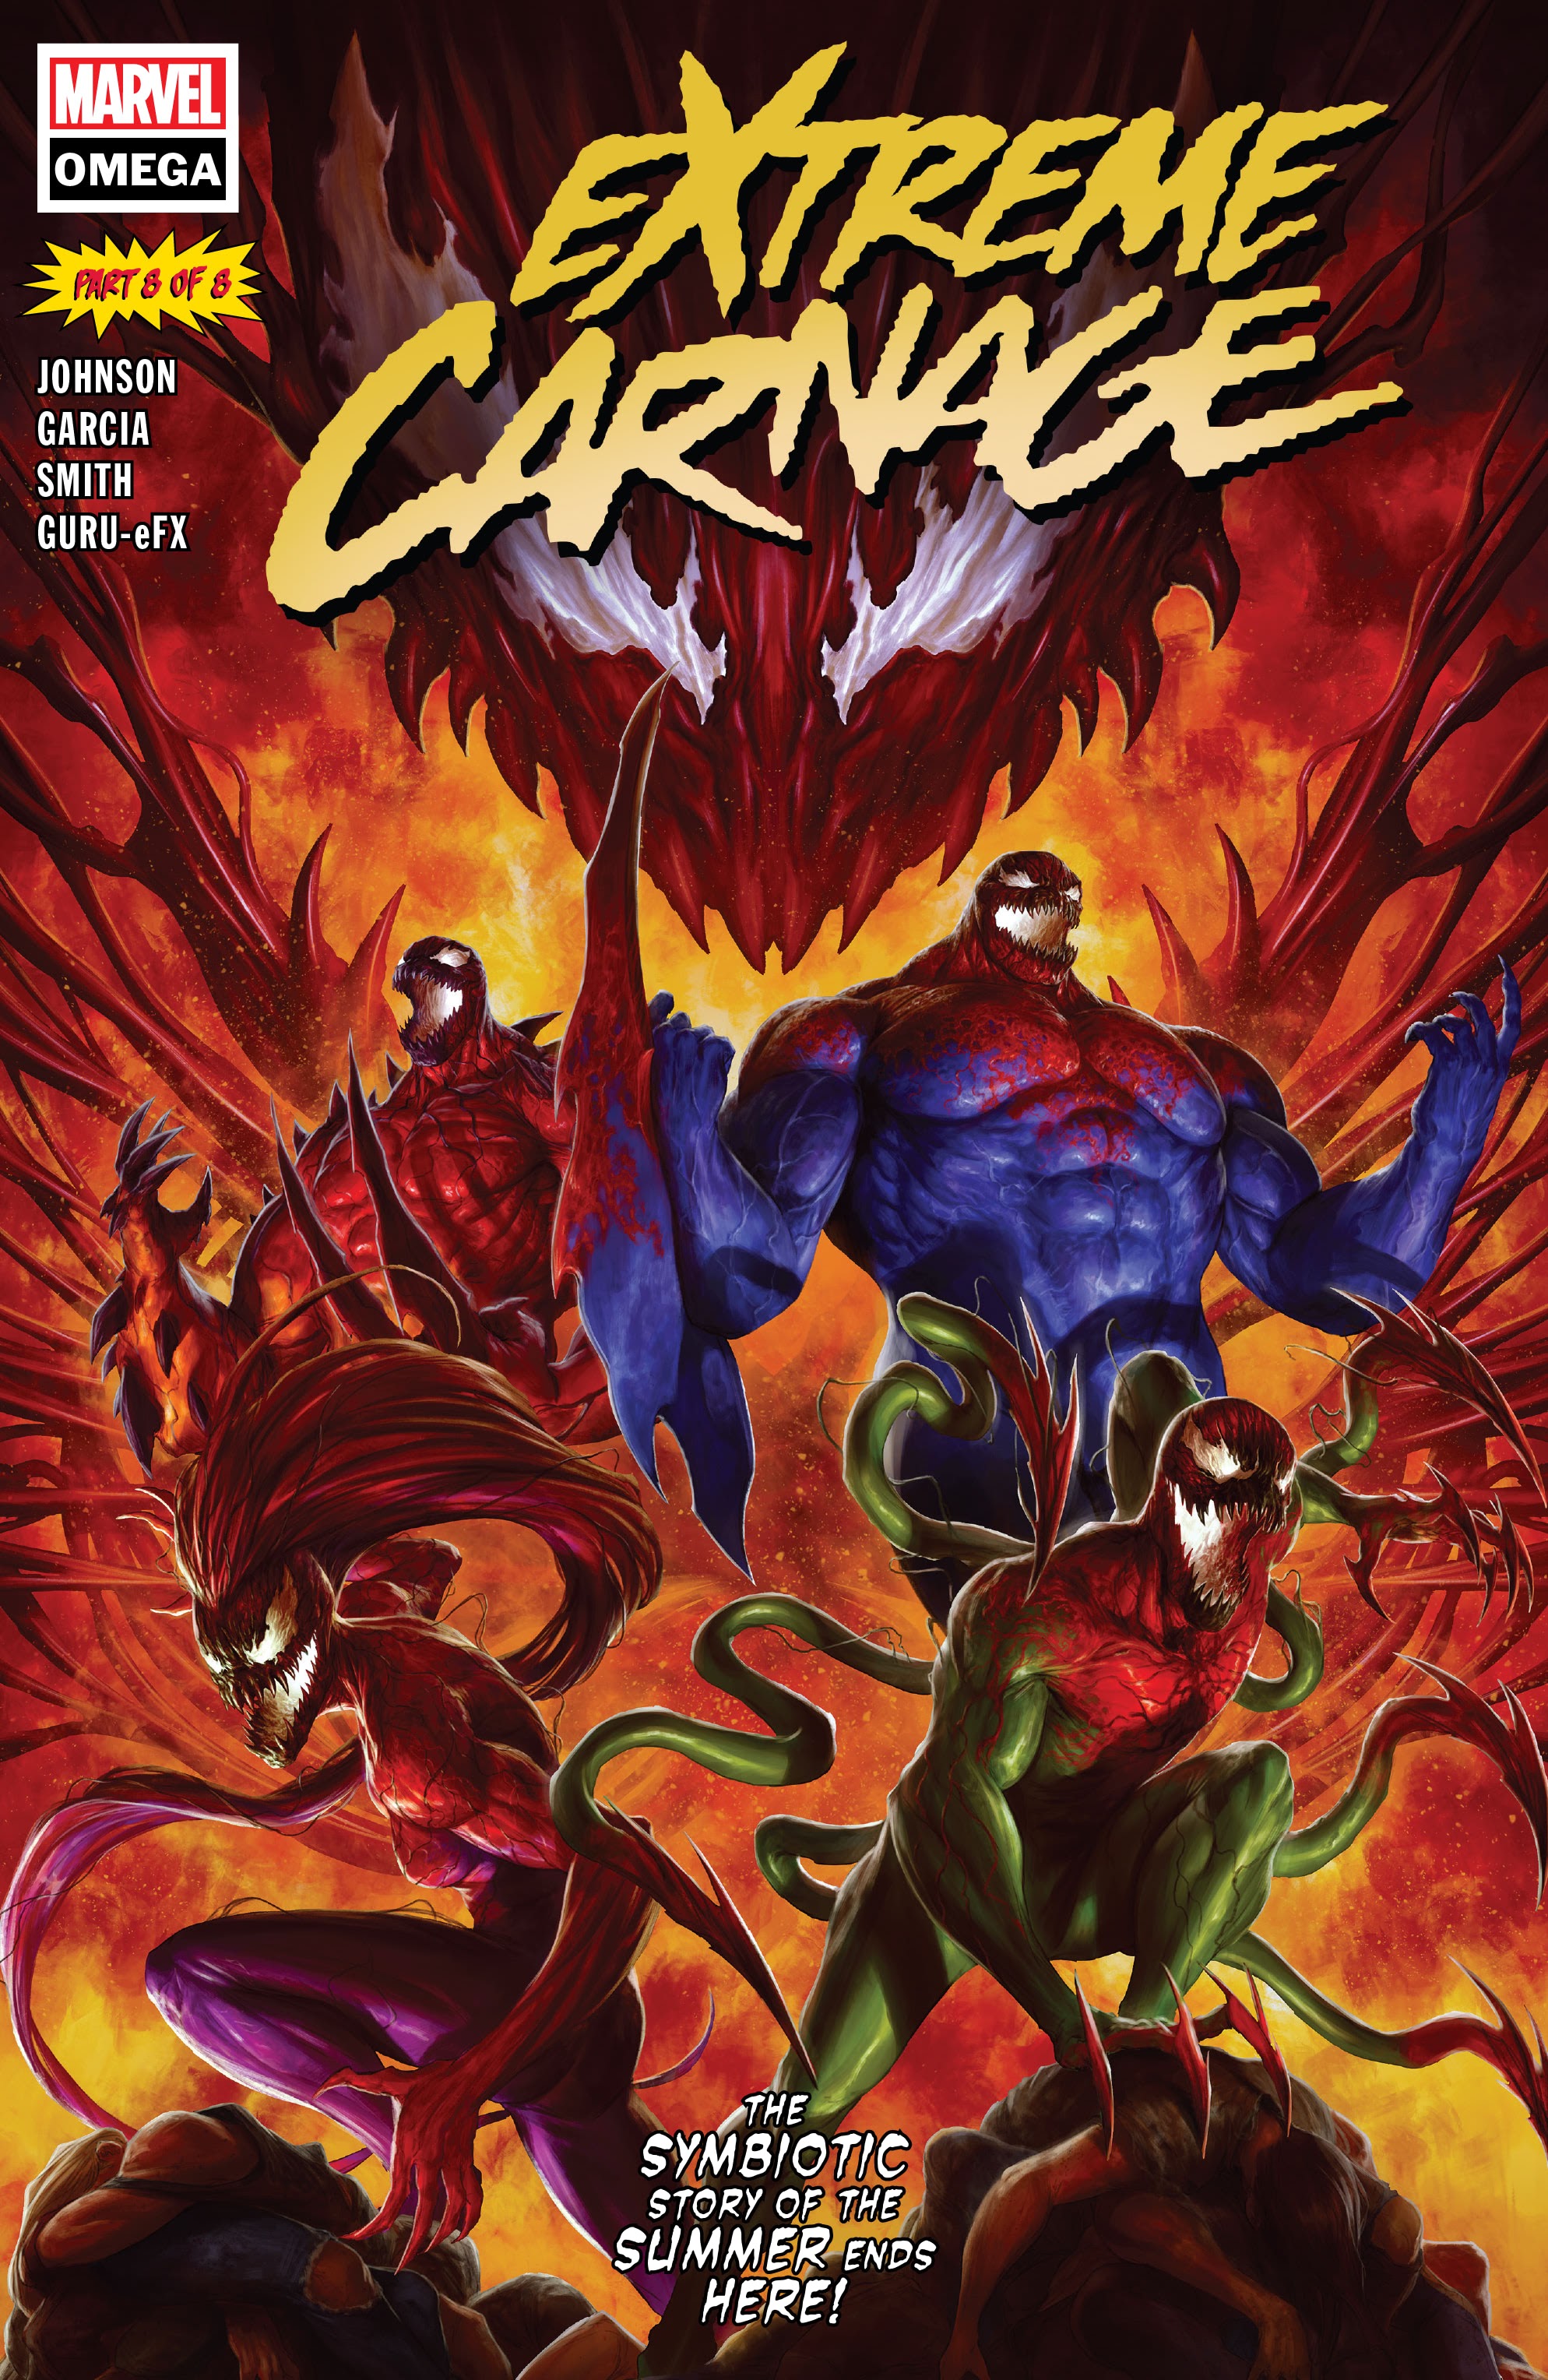 Read online Extreme Carnage comic -  Issue # Omega - 1